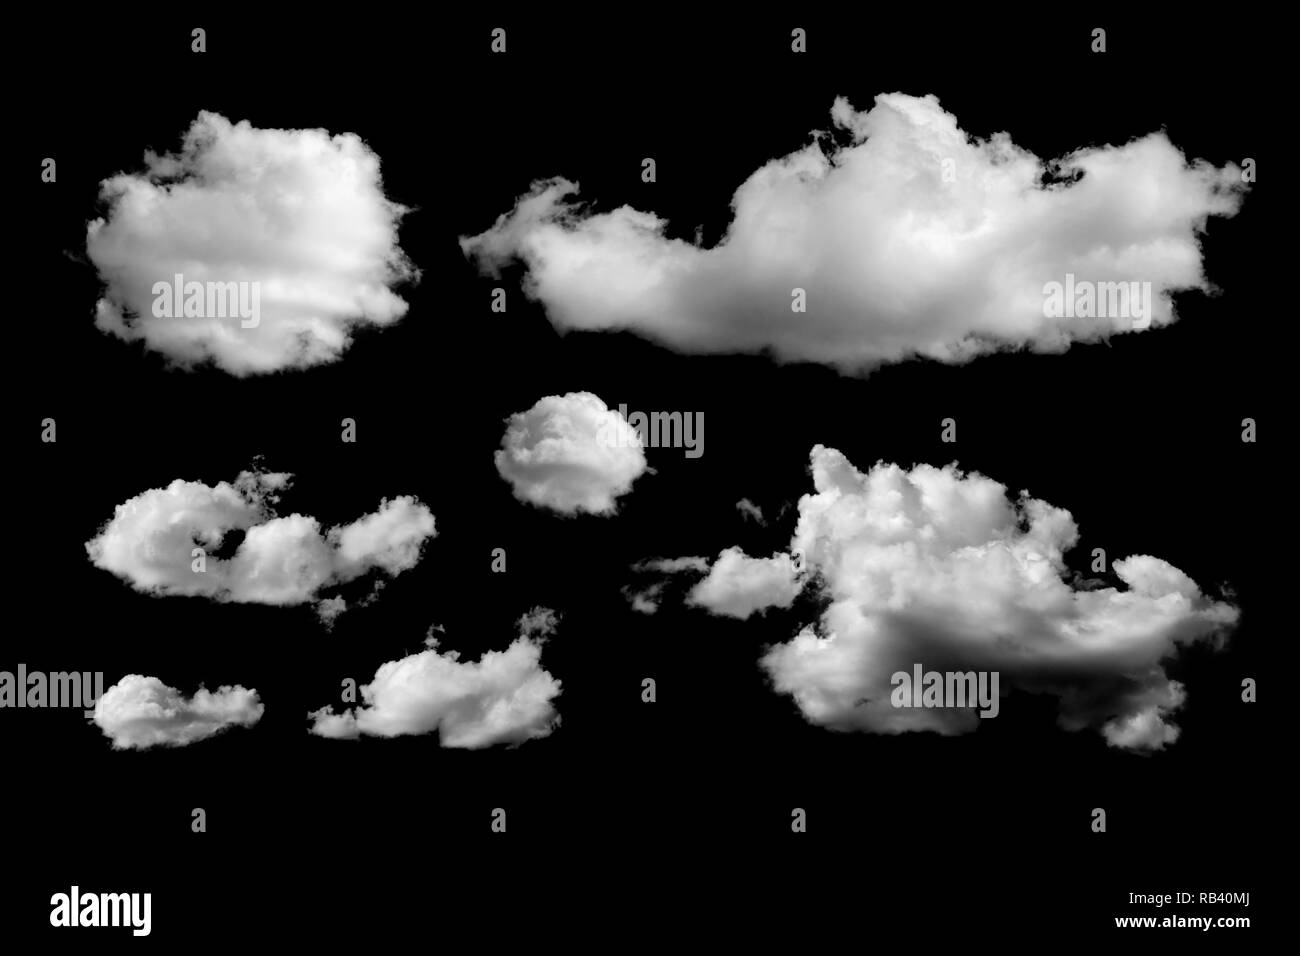 Set of different clouds isolated on black background. Design elements Stock Photo